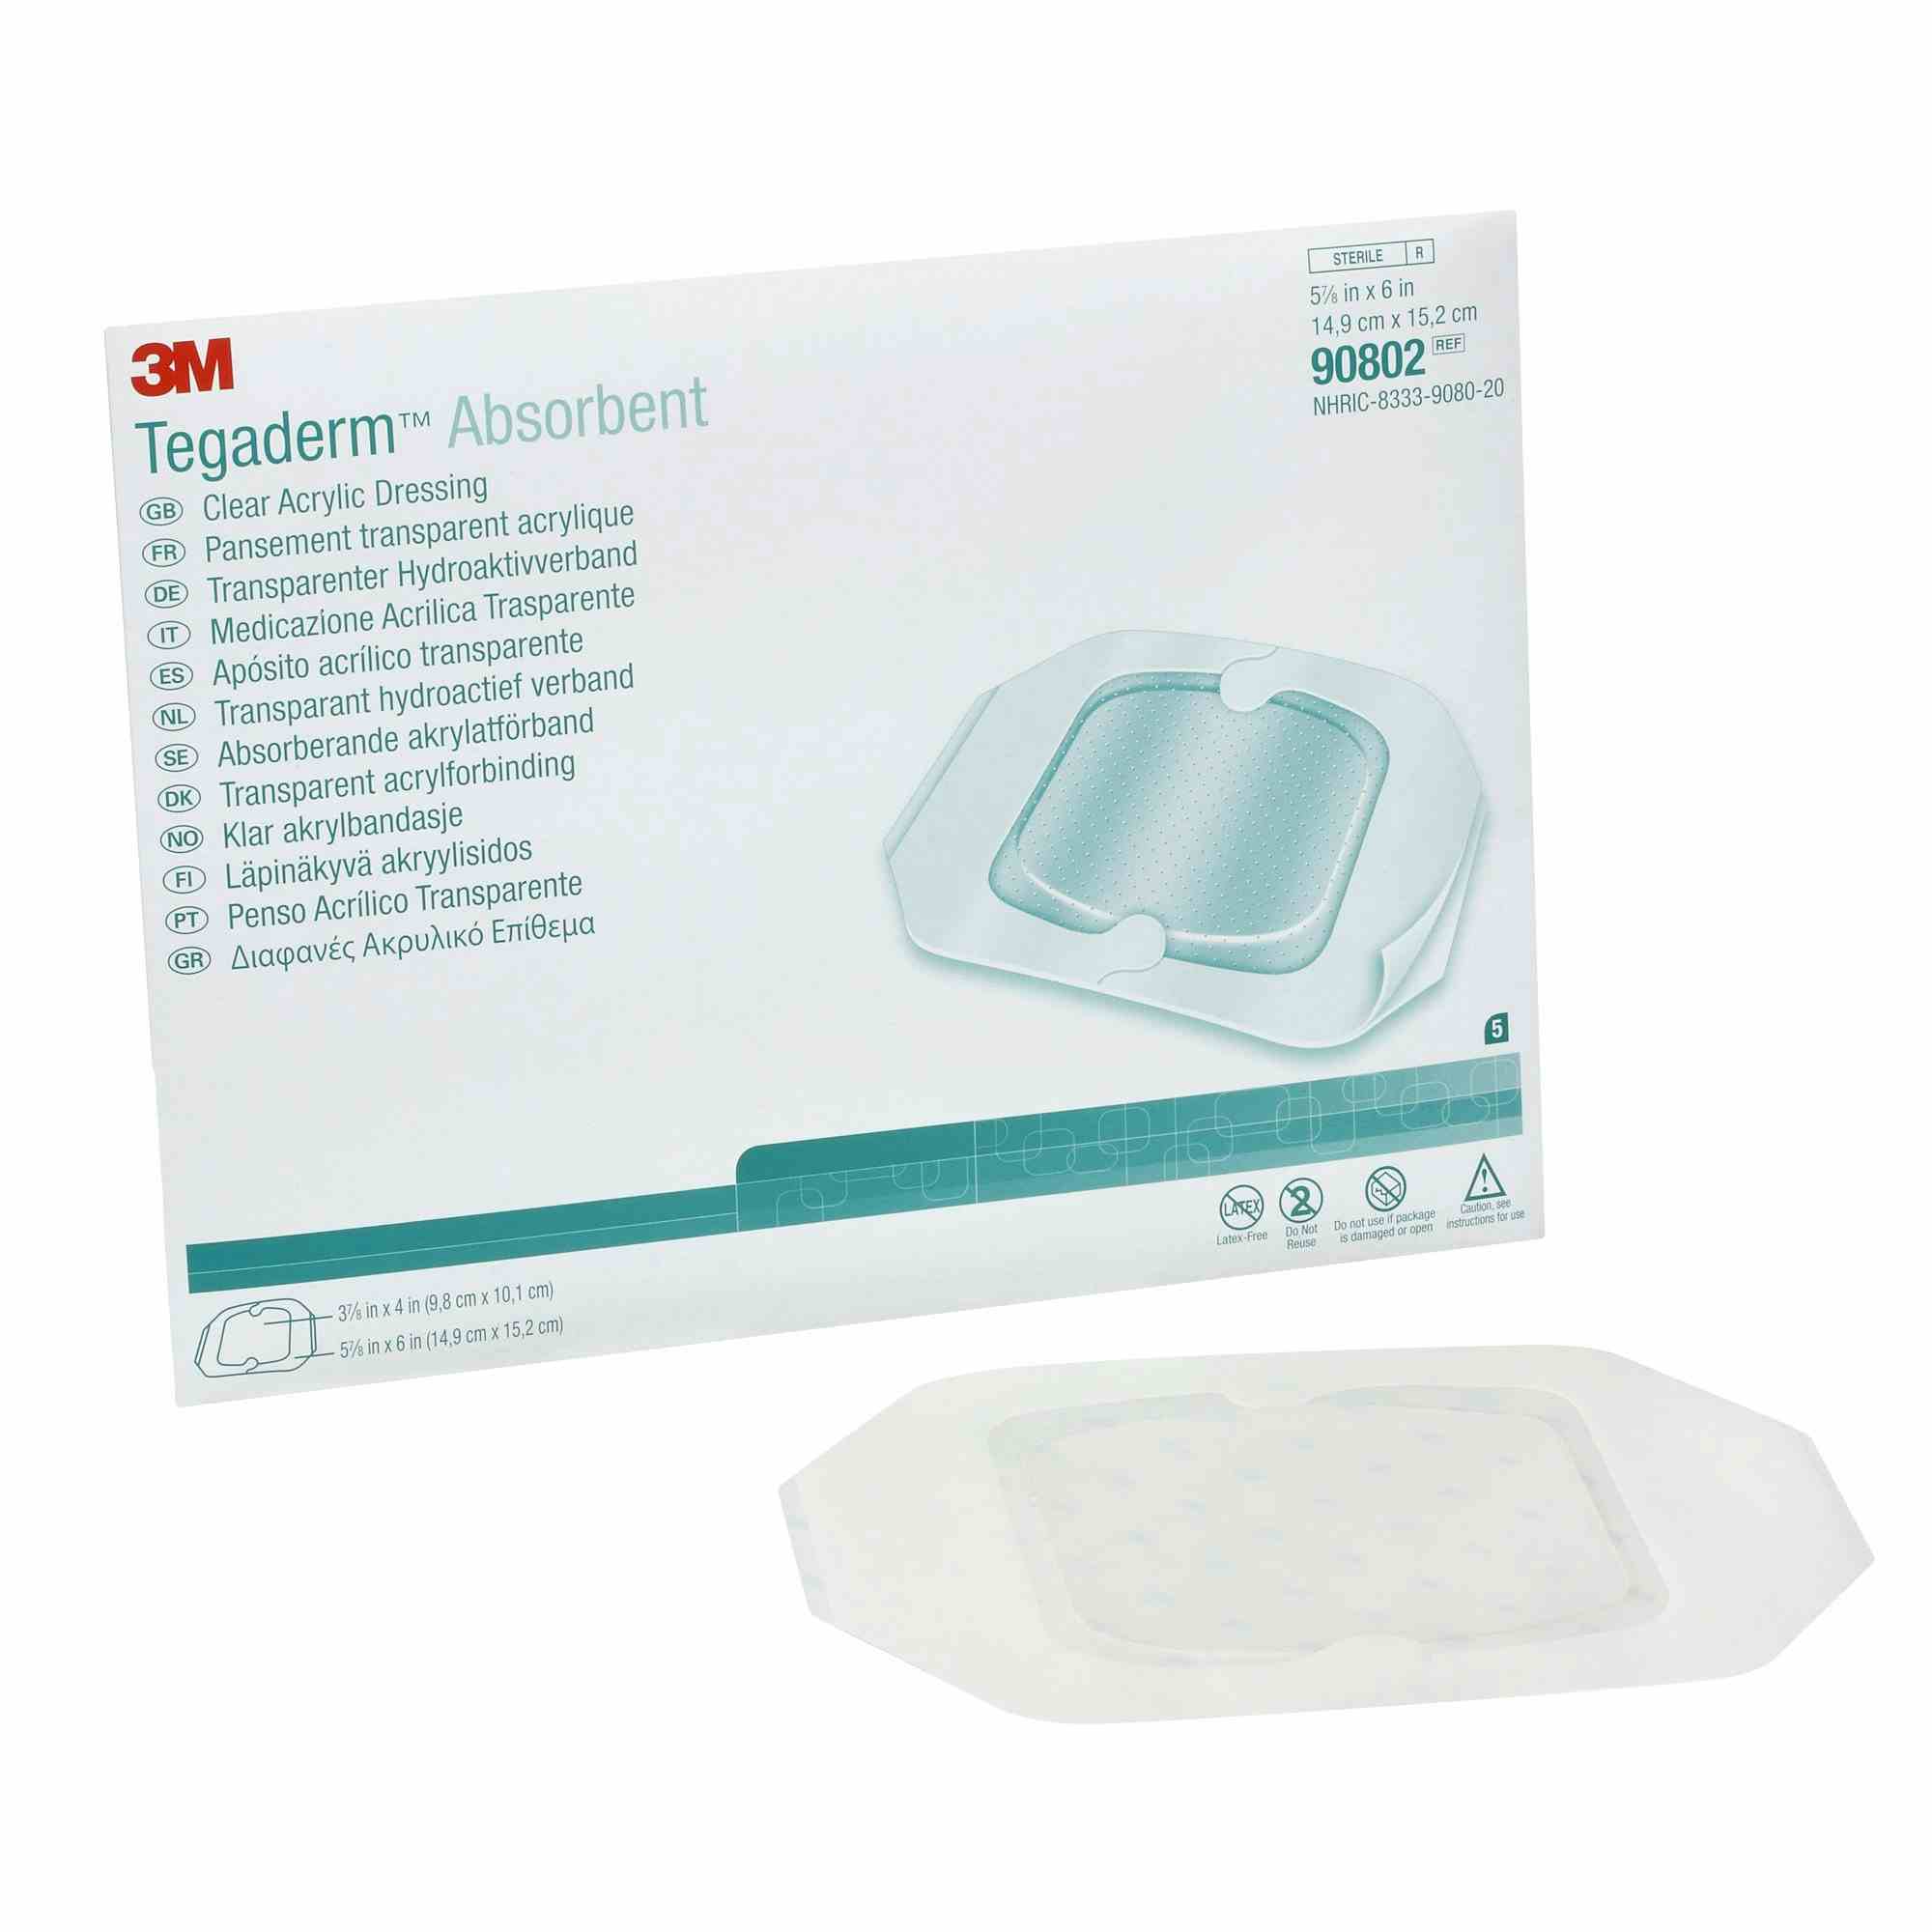 3M Tegaderm Absorbent Clear Acrylic Dressing, 5-7/8 X 6", 90802, Box of 5